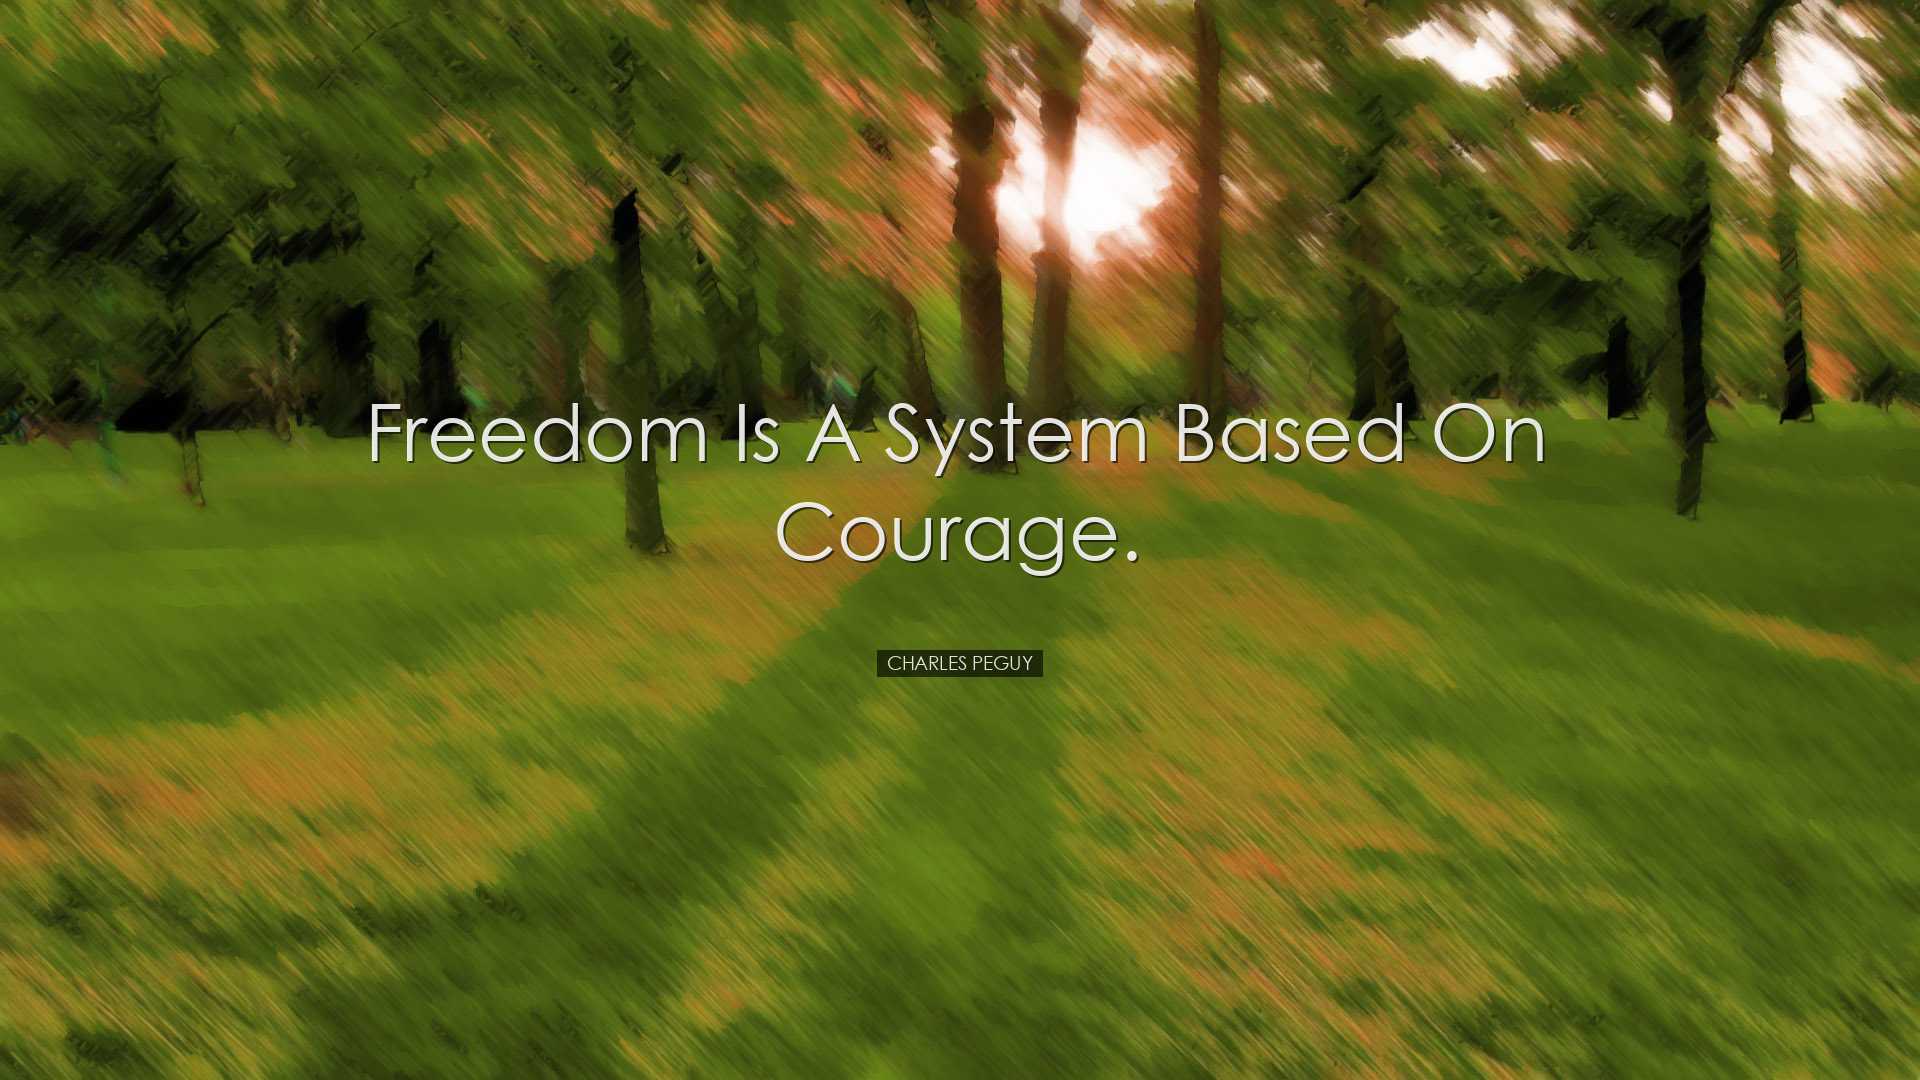 Freedom is a system based on courage. - Charles Peguy